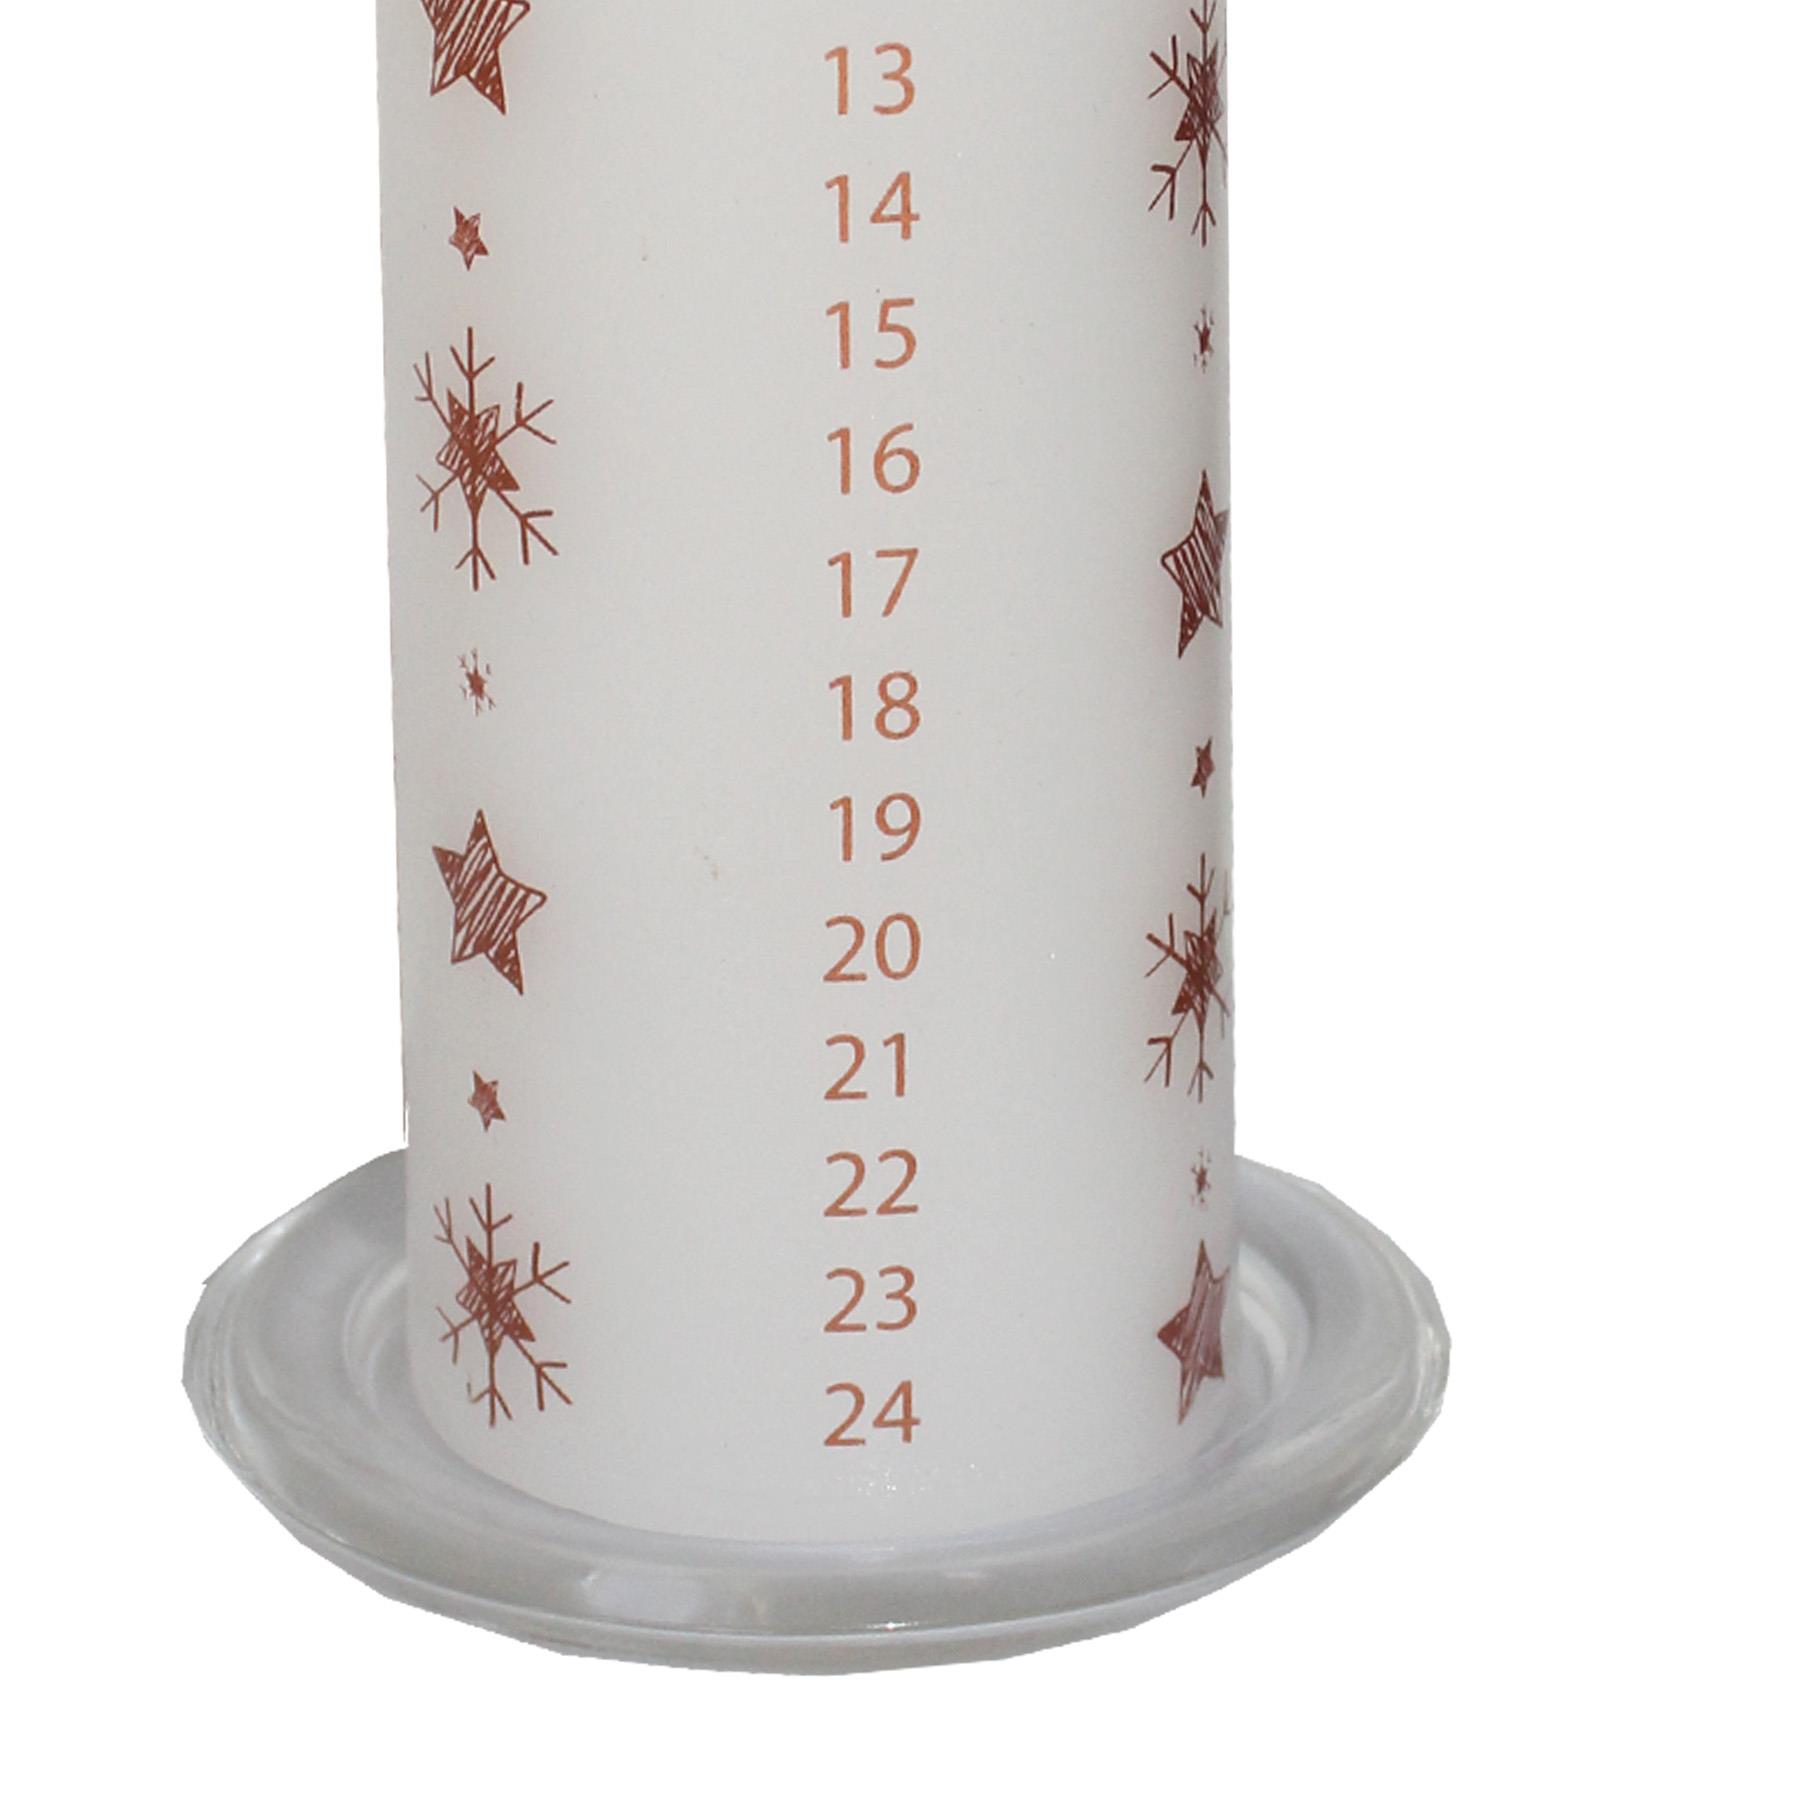 20cm Christmas Advent Candle with Snowflake Image on Glass Tray - White / Rose Gold